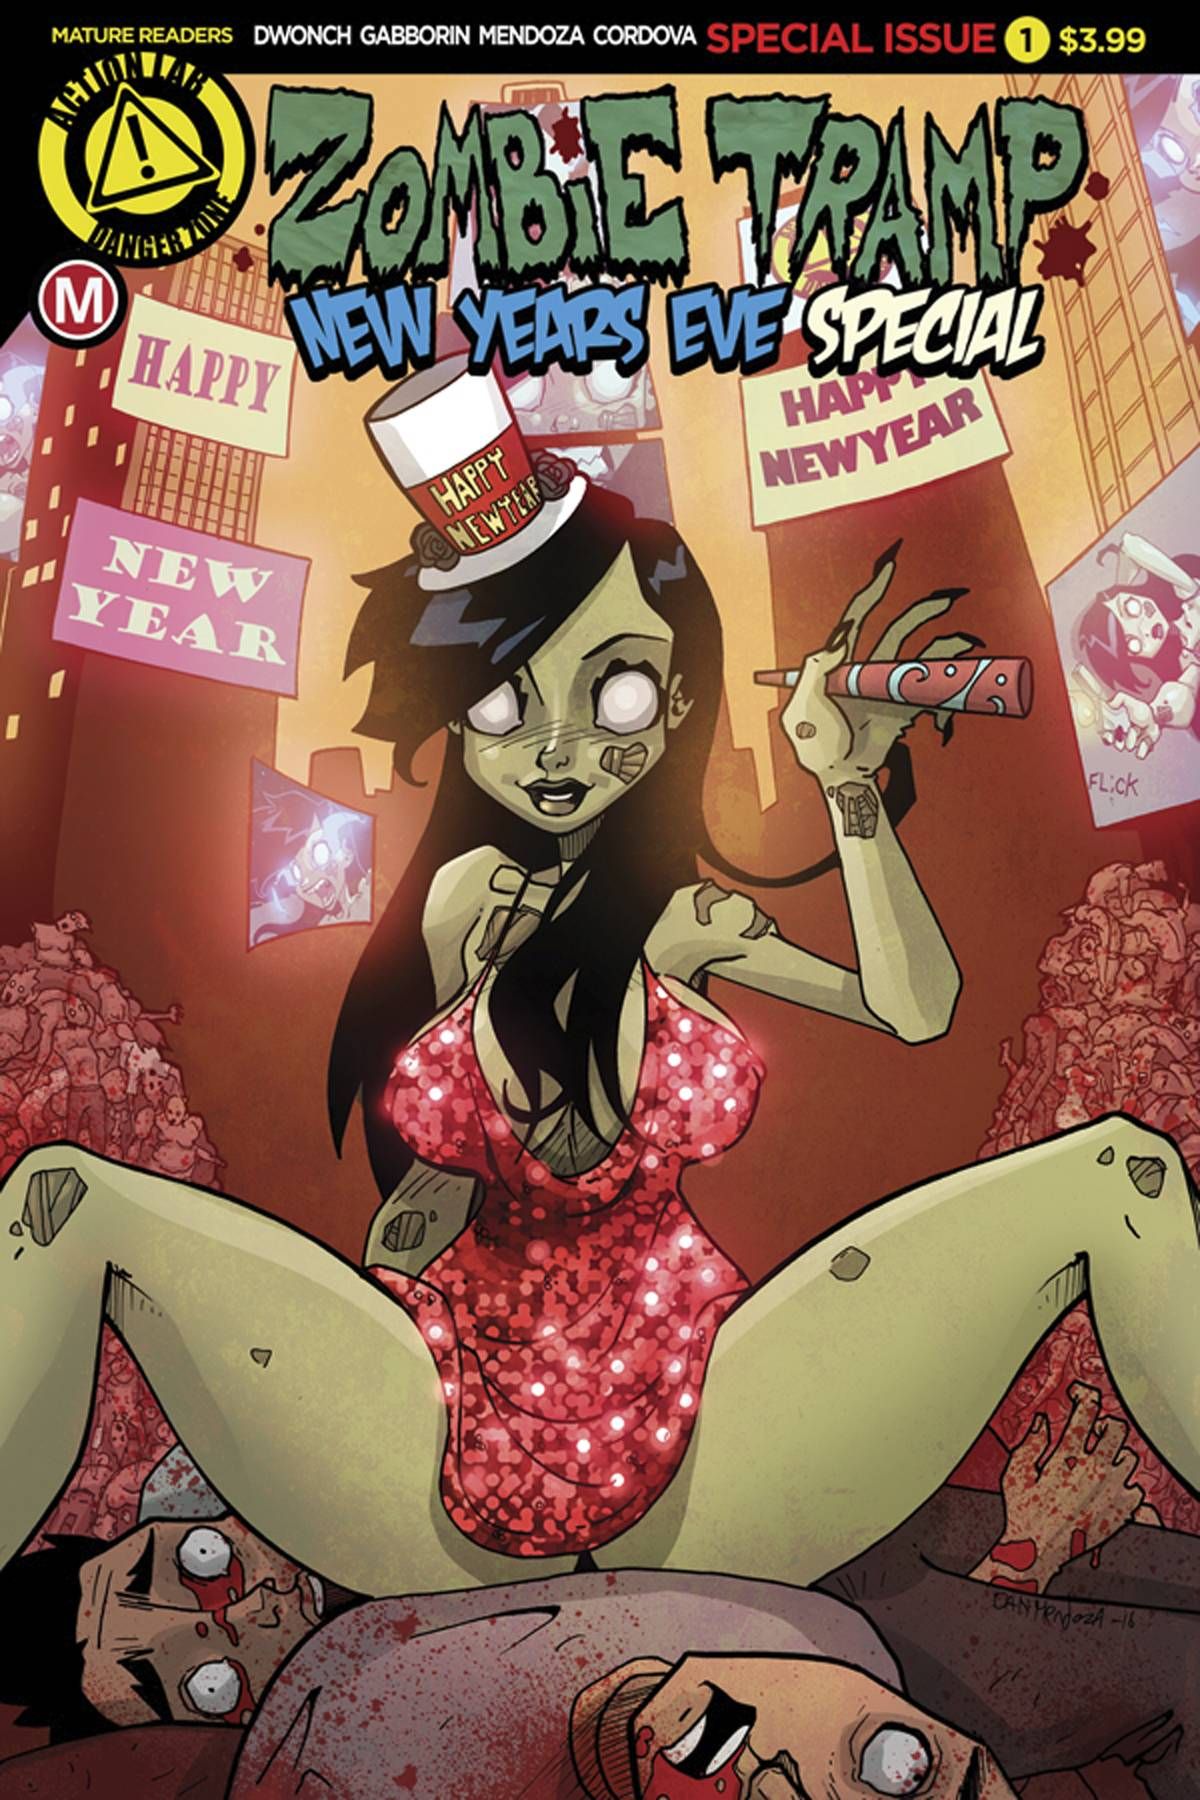 Zombie Tramp: New Years Eve Special Comic